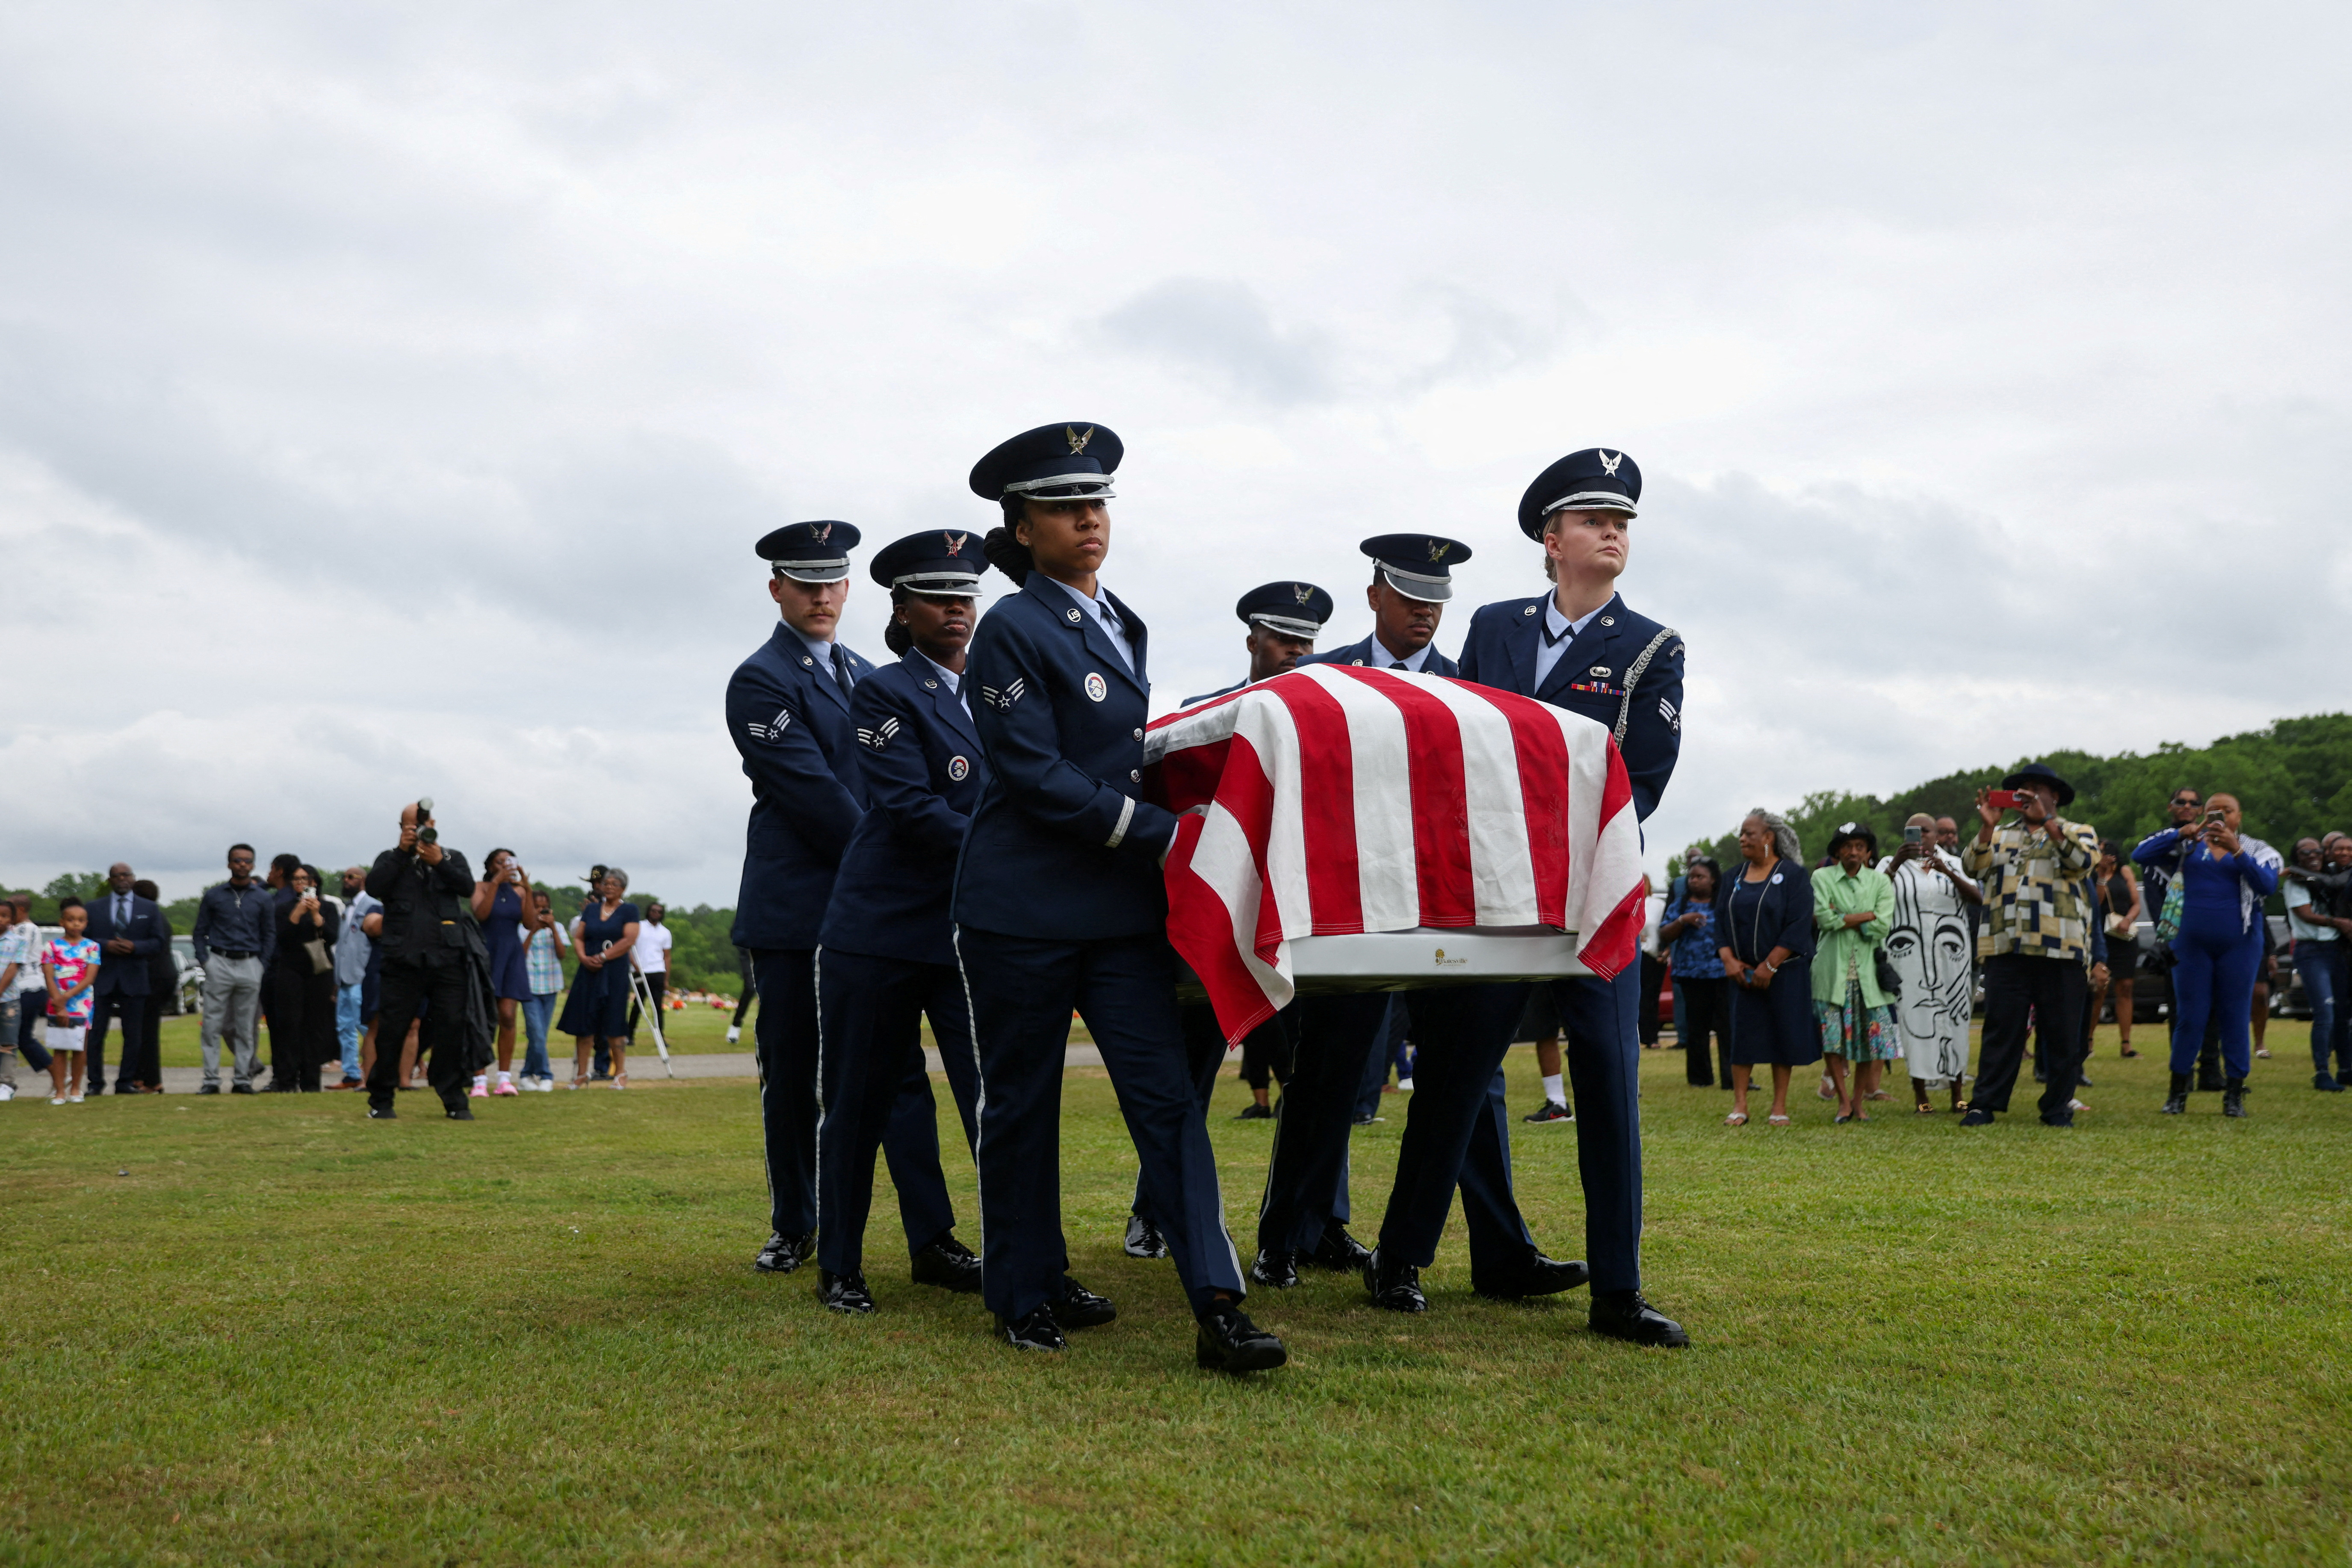 Graveside service of U.S. Airman Roger Fortson, who was shot and killed by police in Florida, in Atlanta